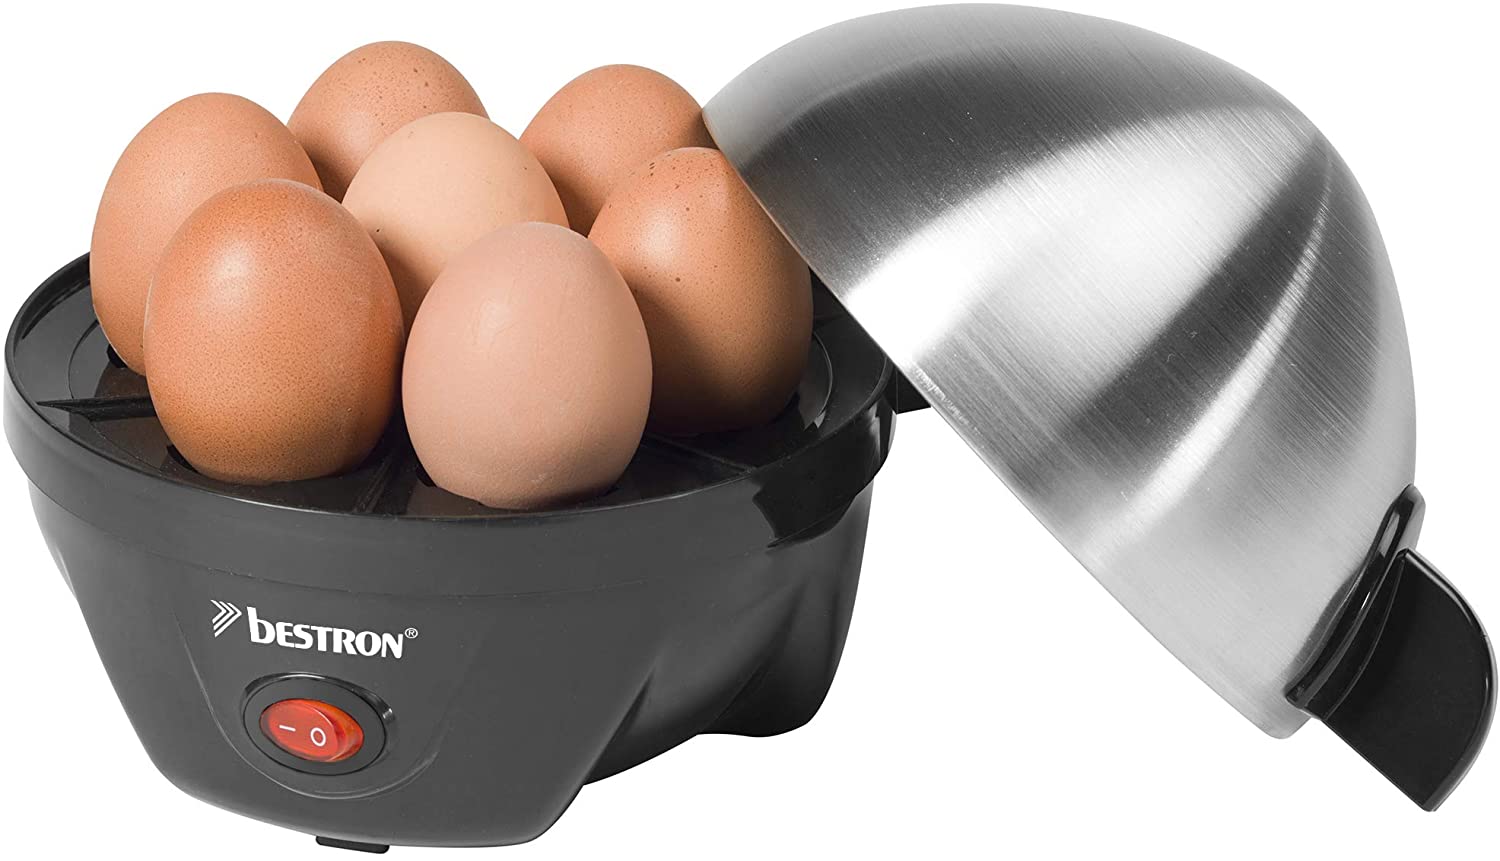 Bestron Breakfast Club 350 Watt Egg Boiler with Measuring Cup and Egg Cutte